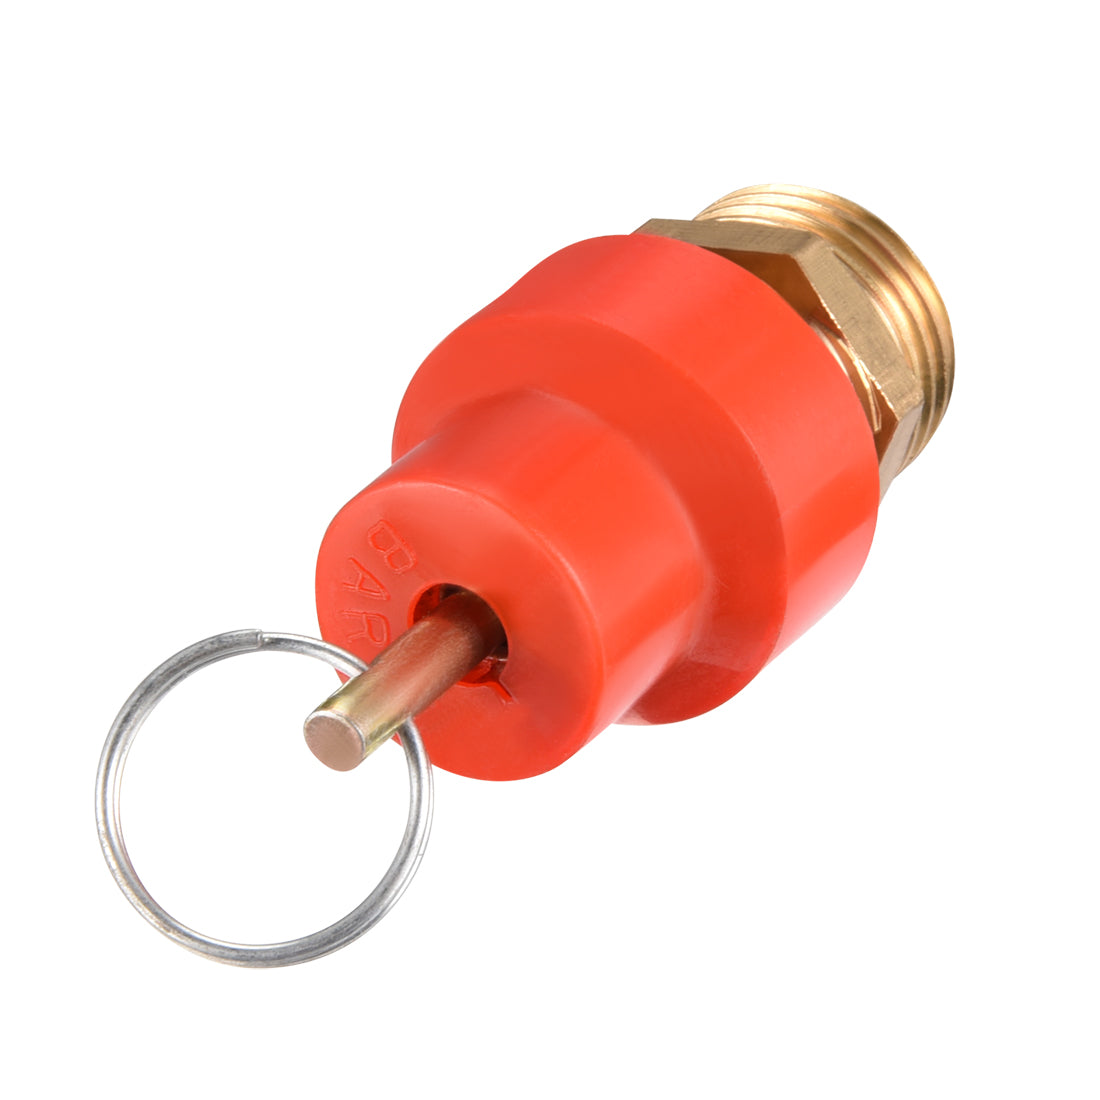 uxcell Uxcell Air Compressor Fittings Pressure Relief Valve 1/2PT Thread 0.78Mpa Red